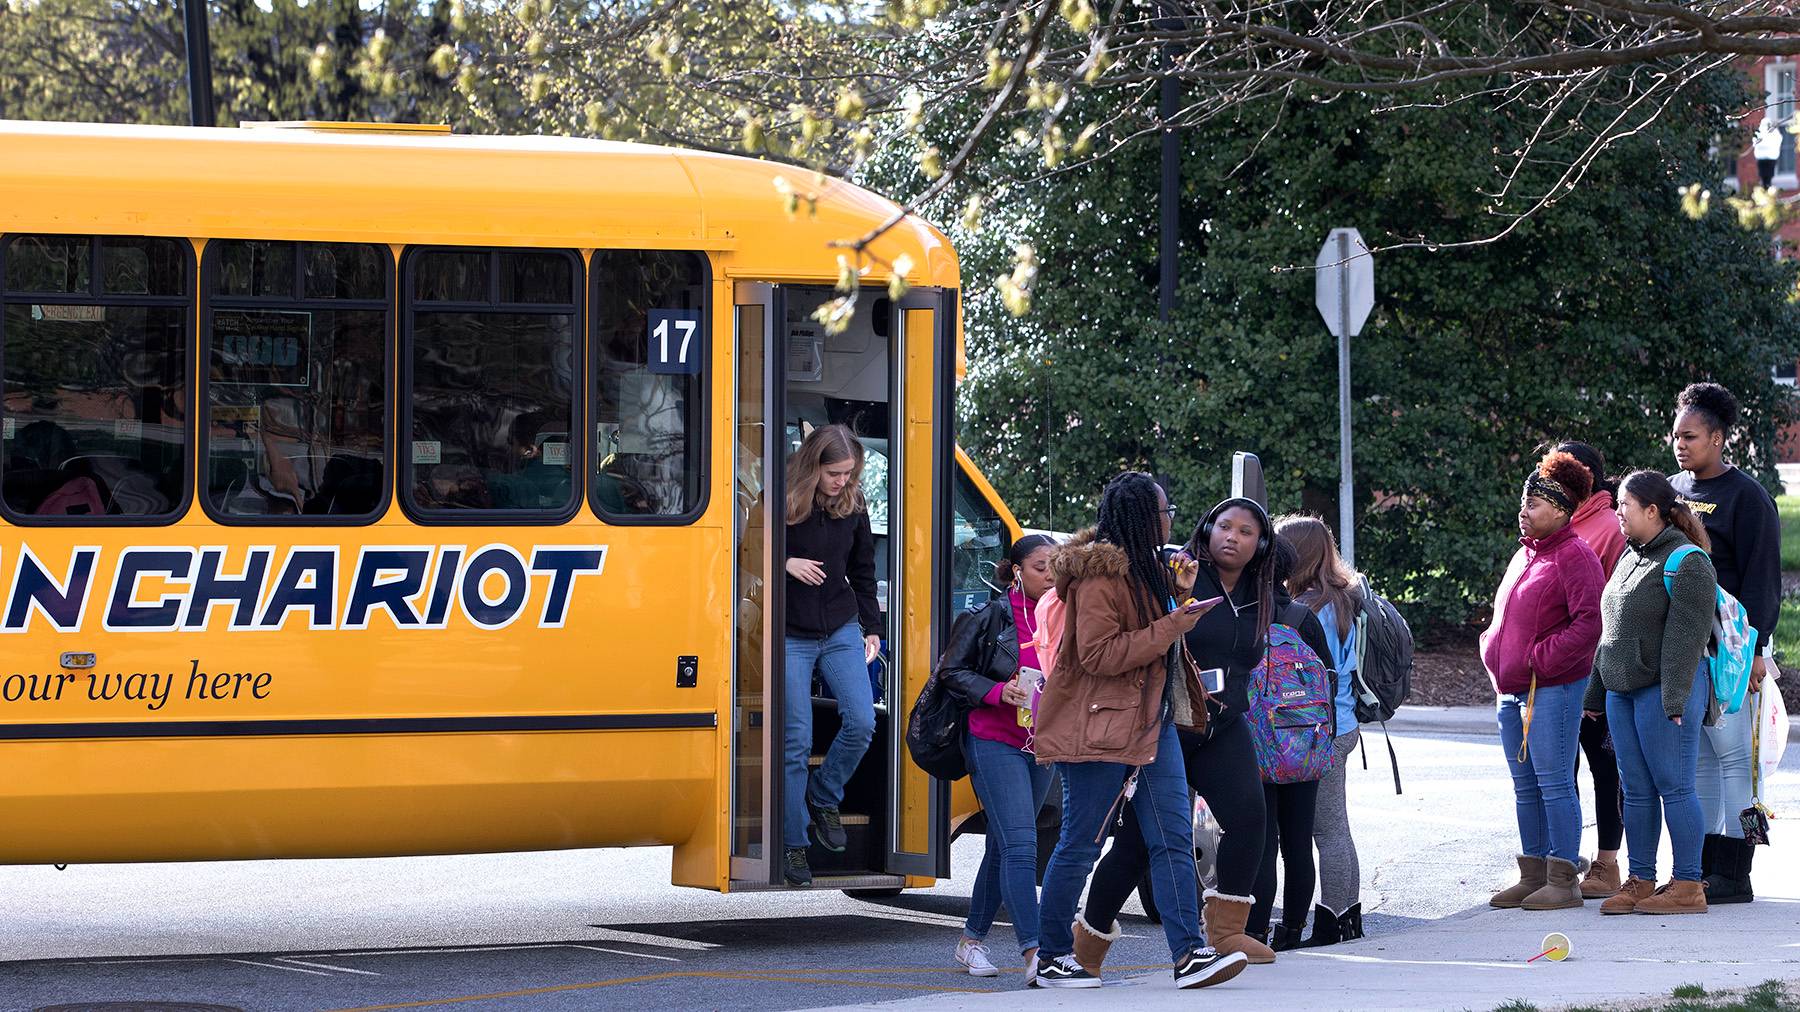 Students get off a Spartan Chariot at a bus stop while others wait to board.